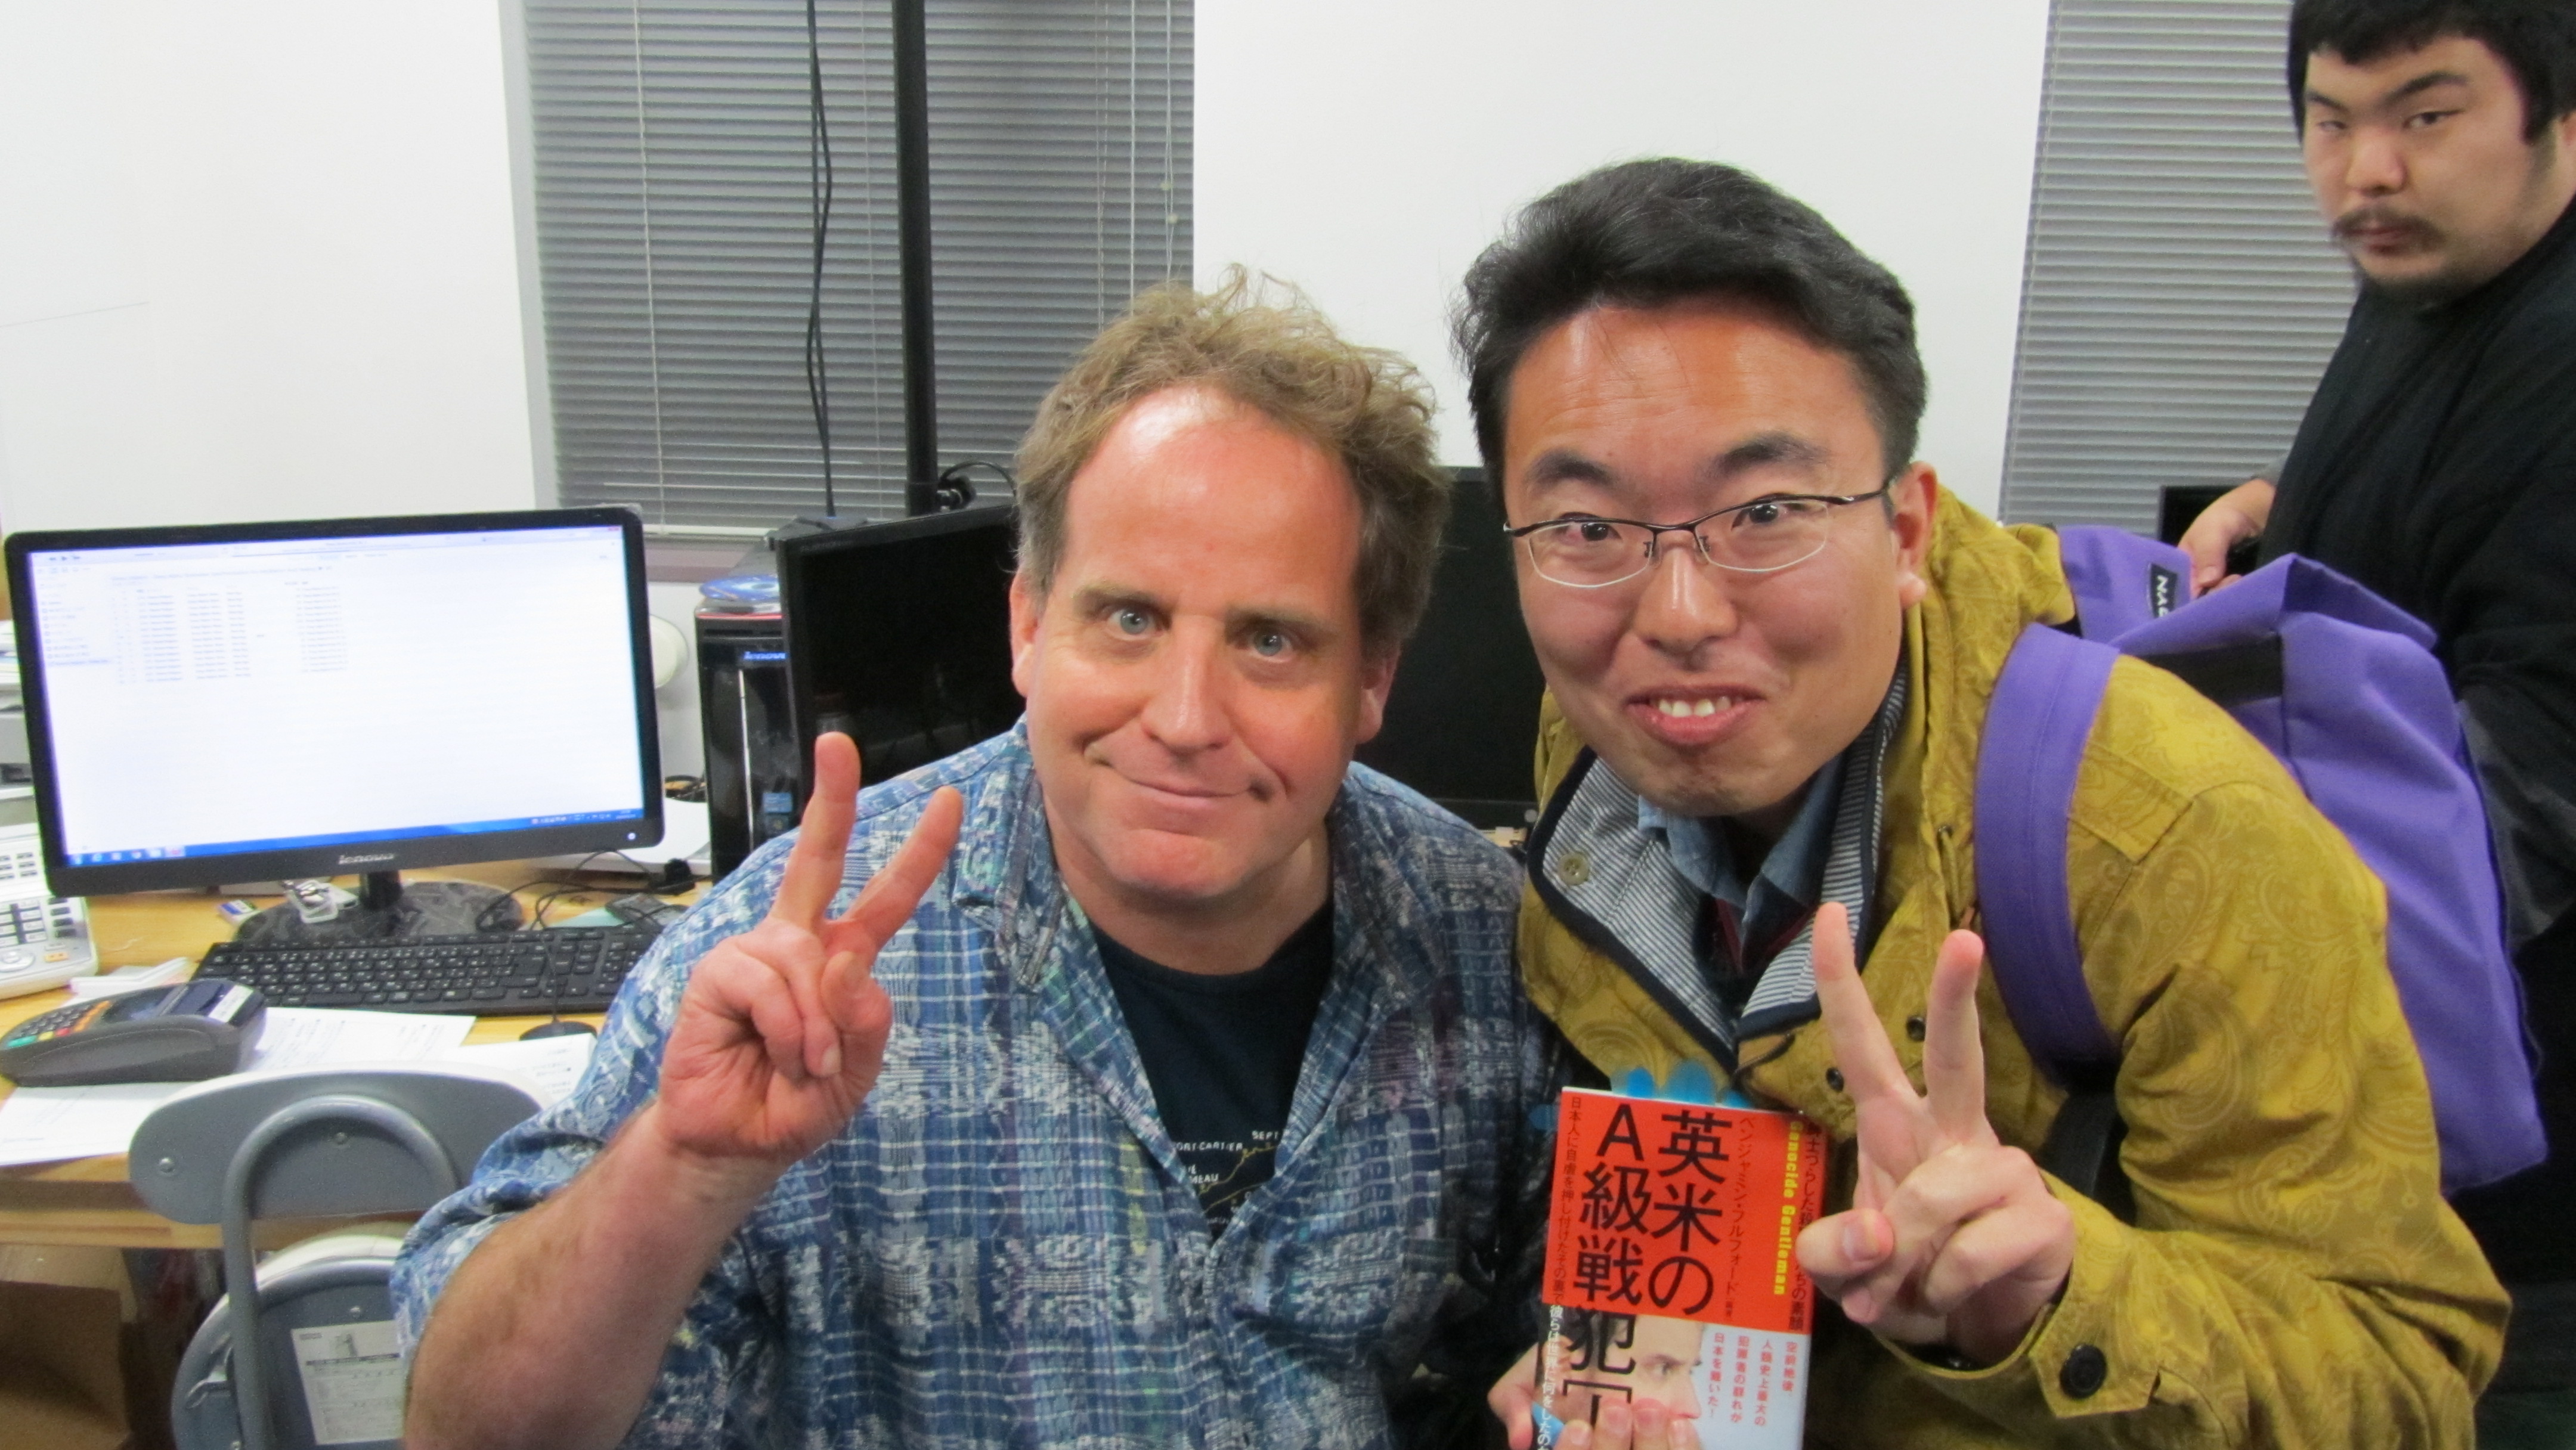 Benjamin Fulford is a renowned conspiracy theorist and ex-chief editor of Forbes in Japan. This photo was shot at Hikaruland in iidabashi, Tokyo, Japan in Jan.24, 2015.